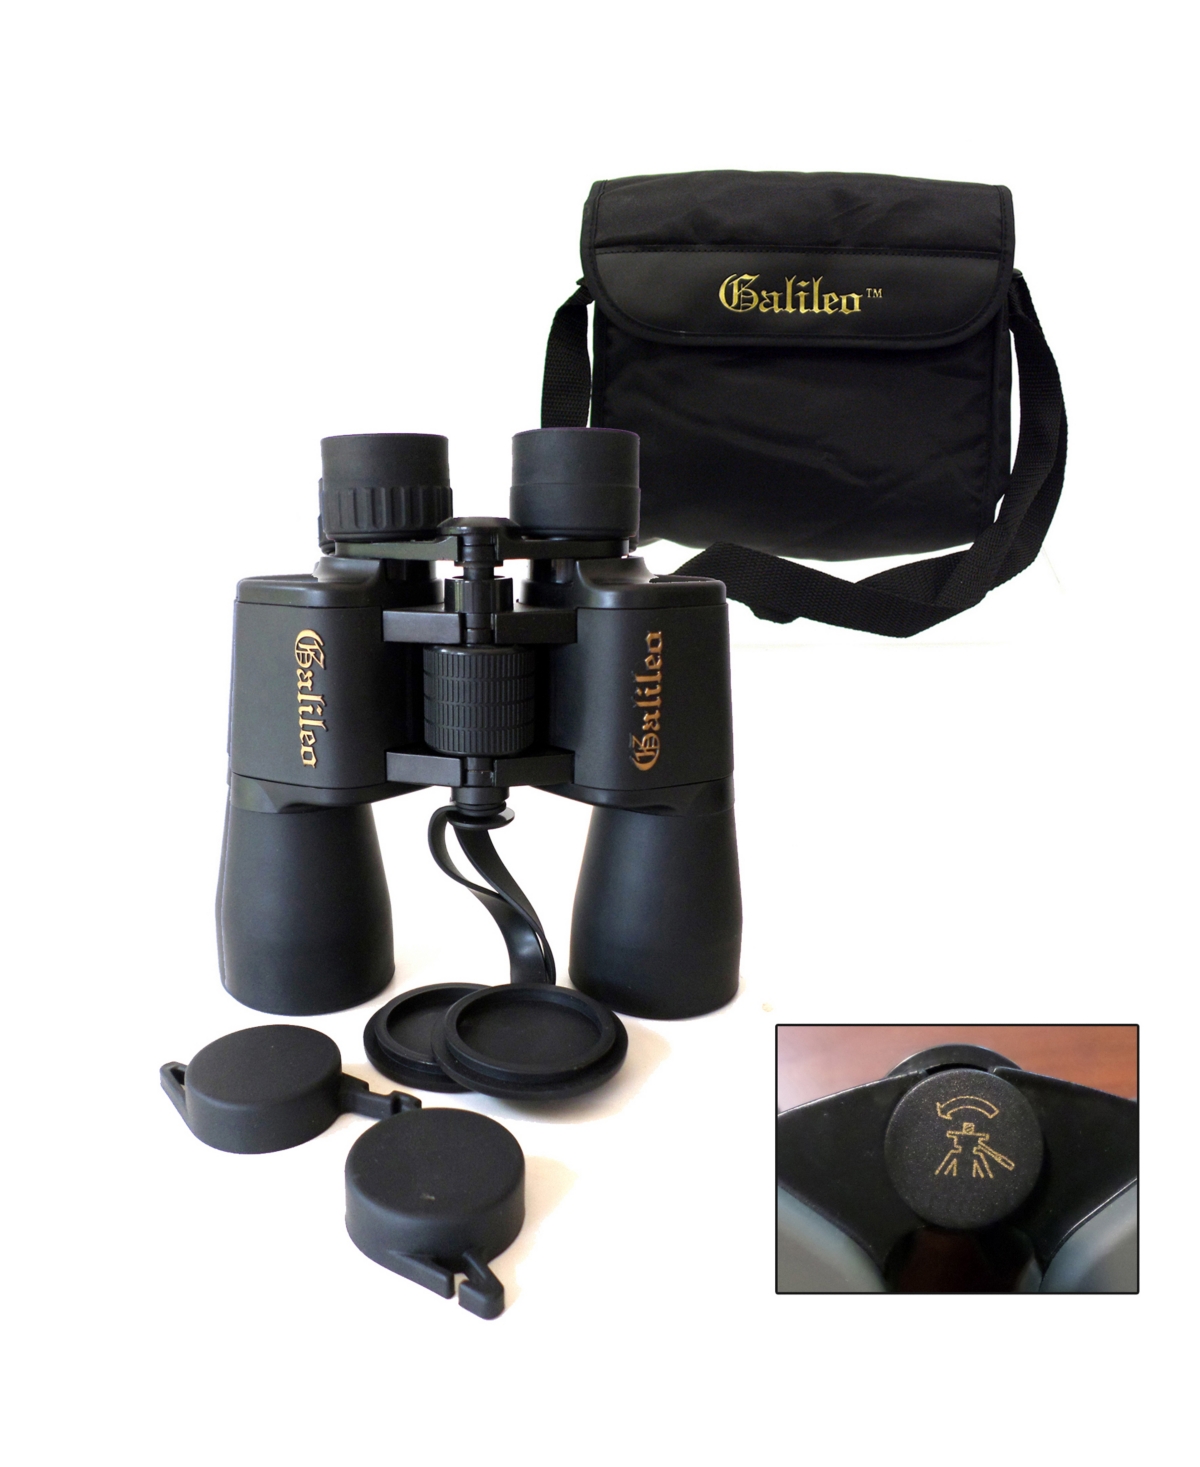 Cosmo Brands Galileo 16 Power Astronomical Binocular With 50mm Lenses, Tripod Socket And Case In Black